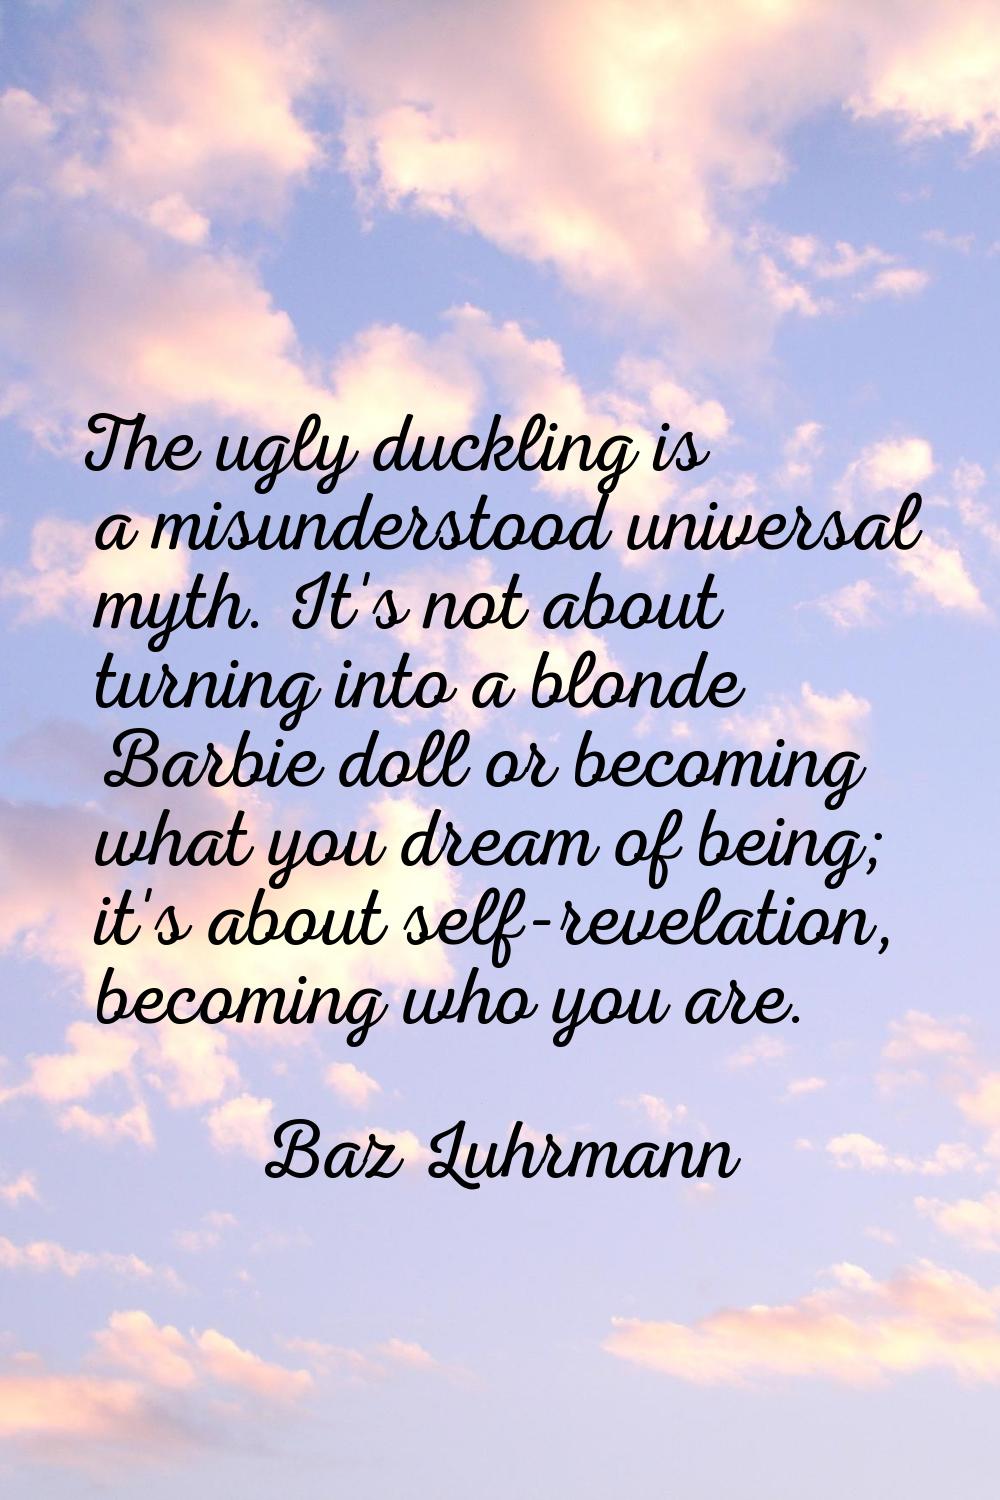 The ugly duckling is a misunderstood universal myth. It's not about turning into a blonde Barbie do